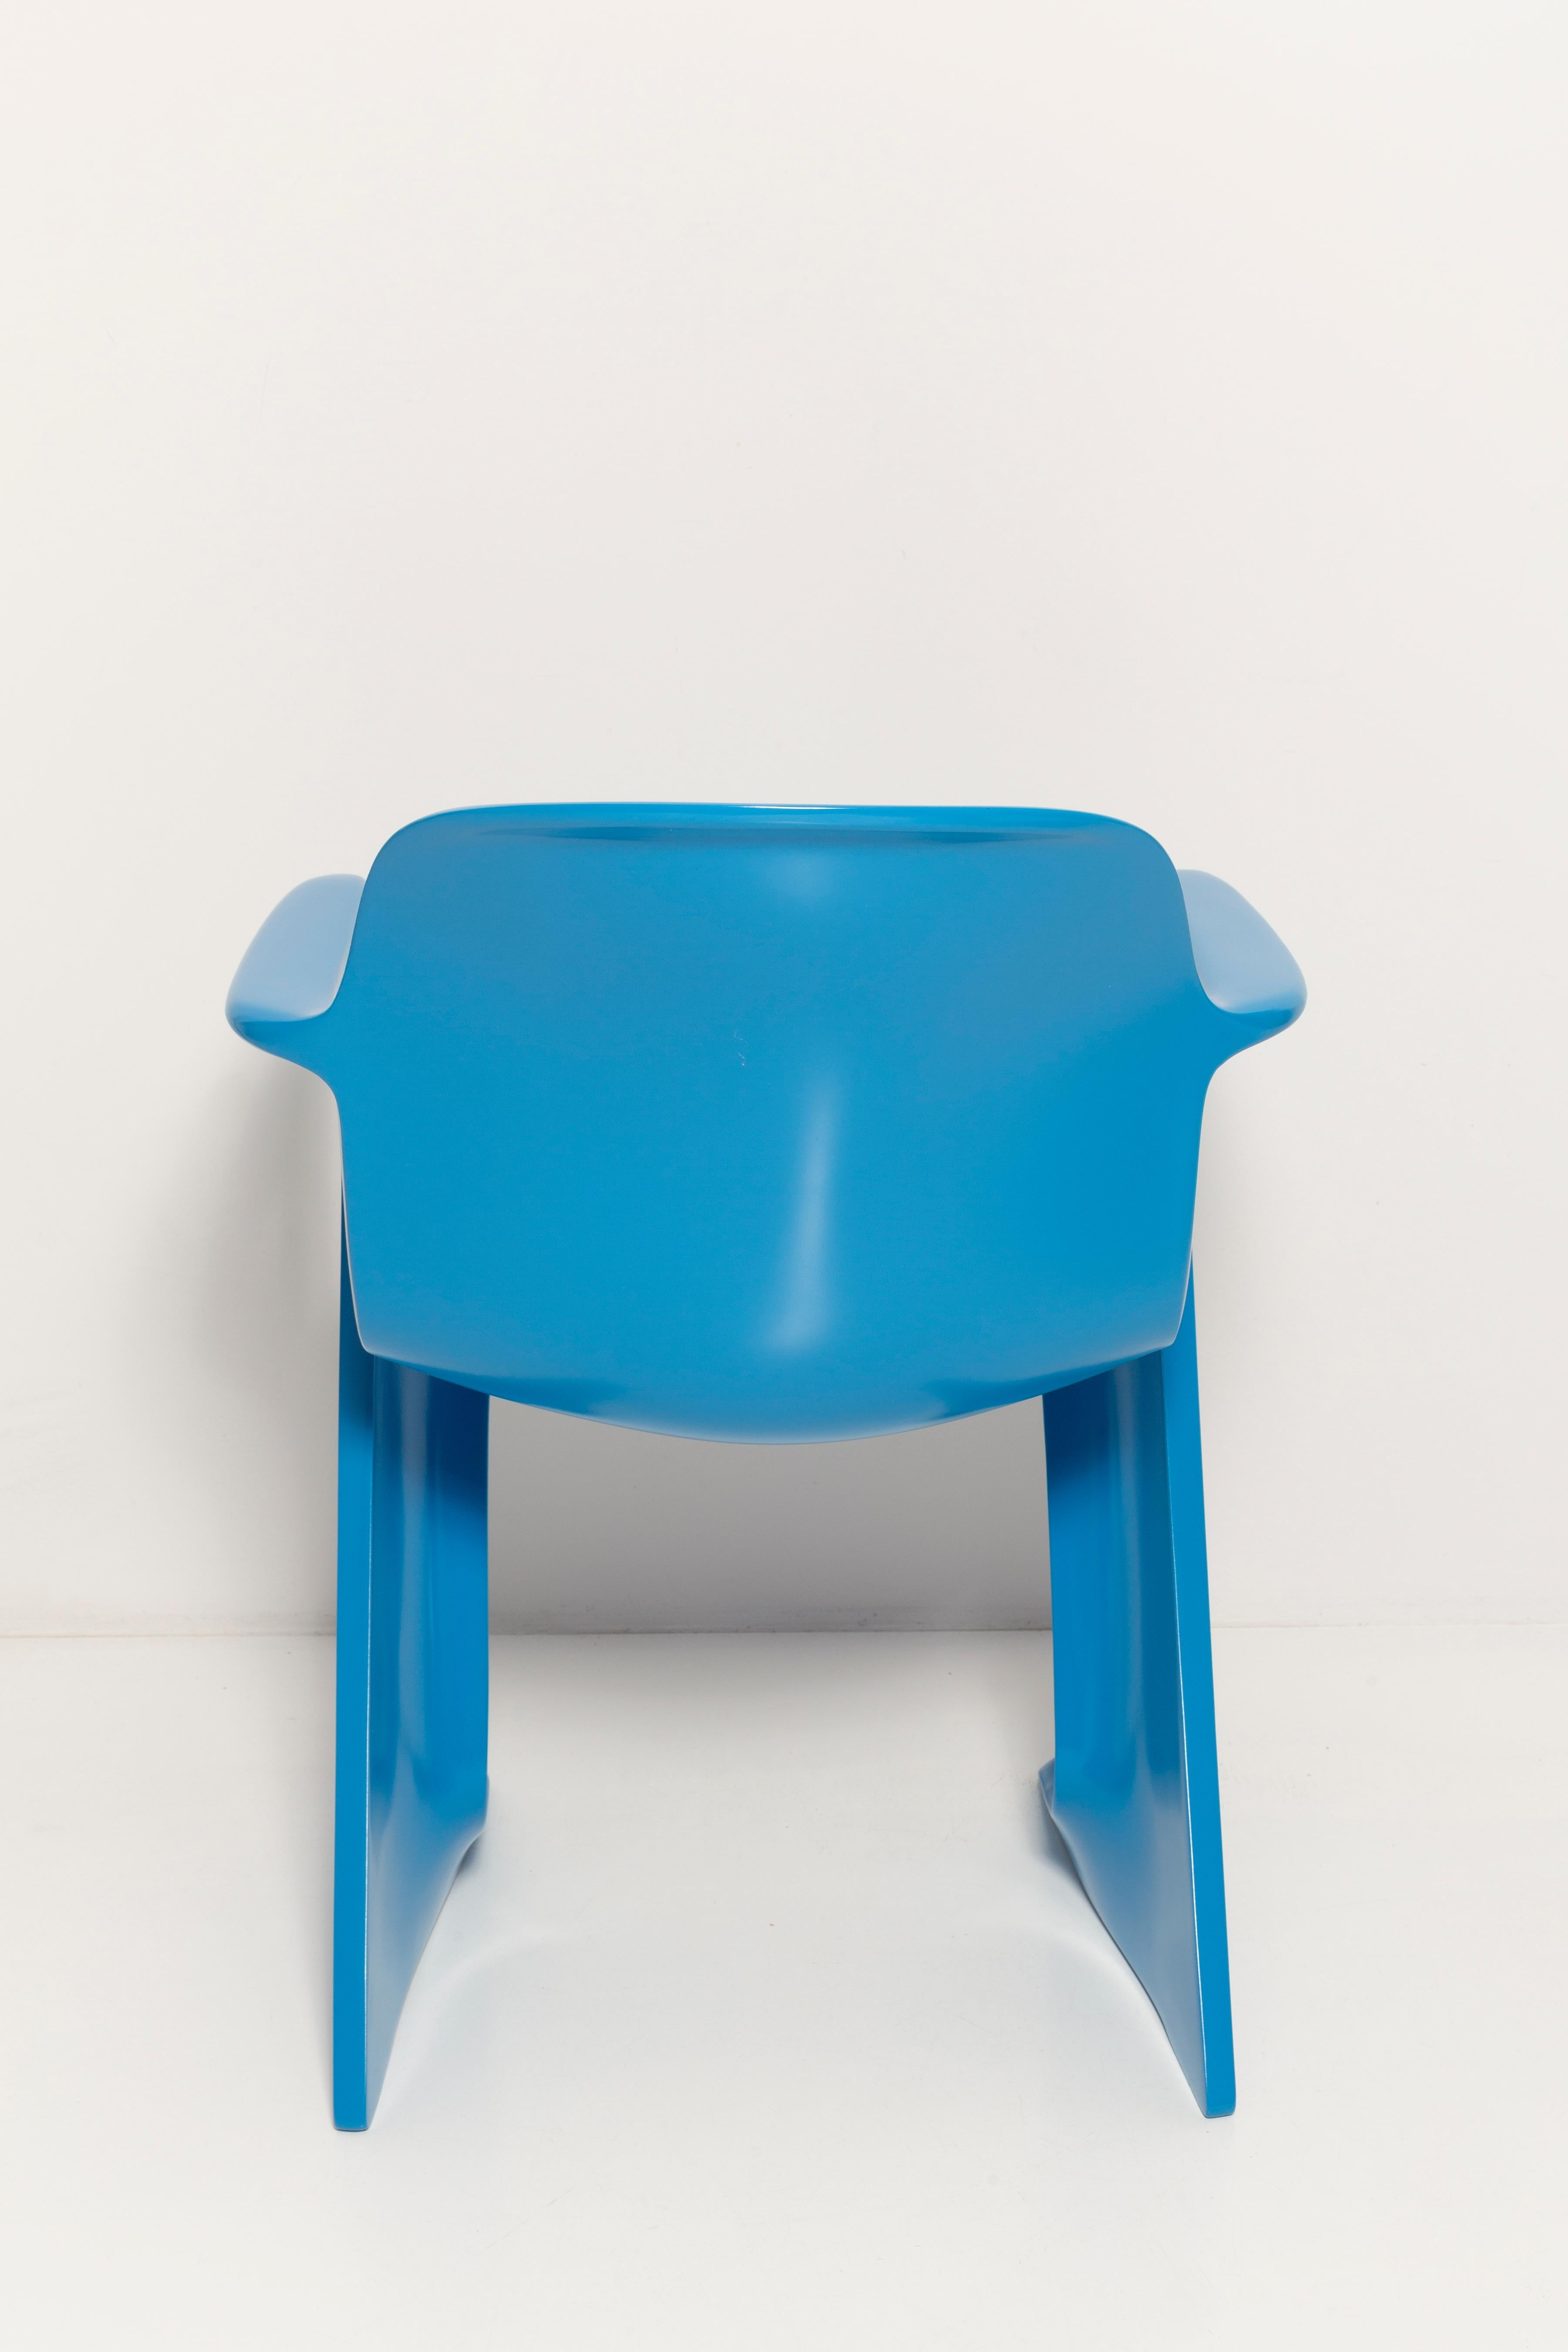 Blue Kangaroo Chair Designed by Ernst Moeckl, Germany, 1968 For Sale 4